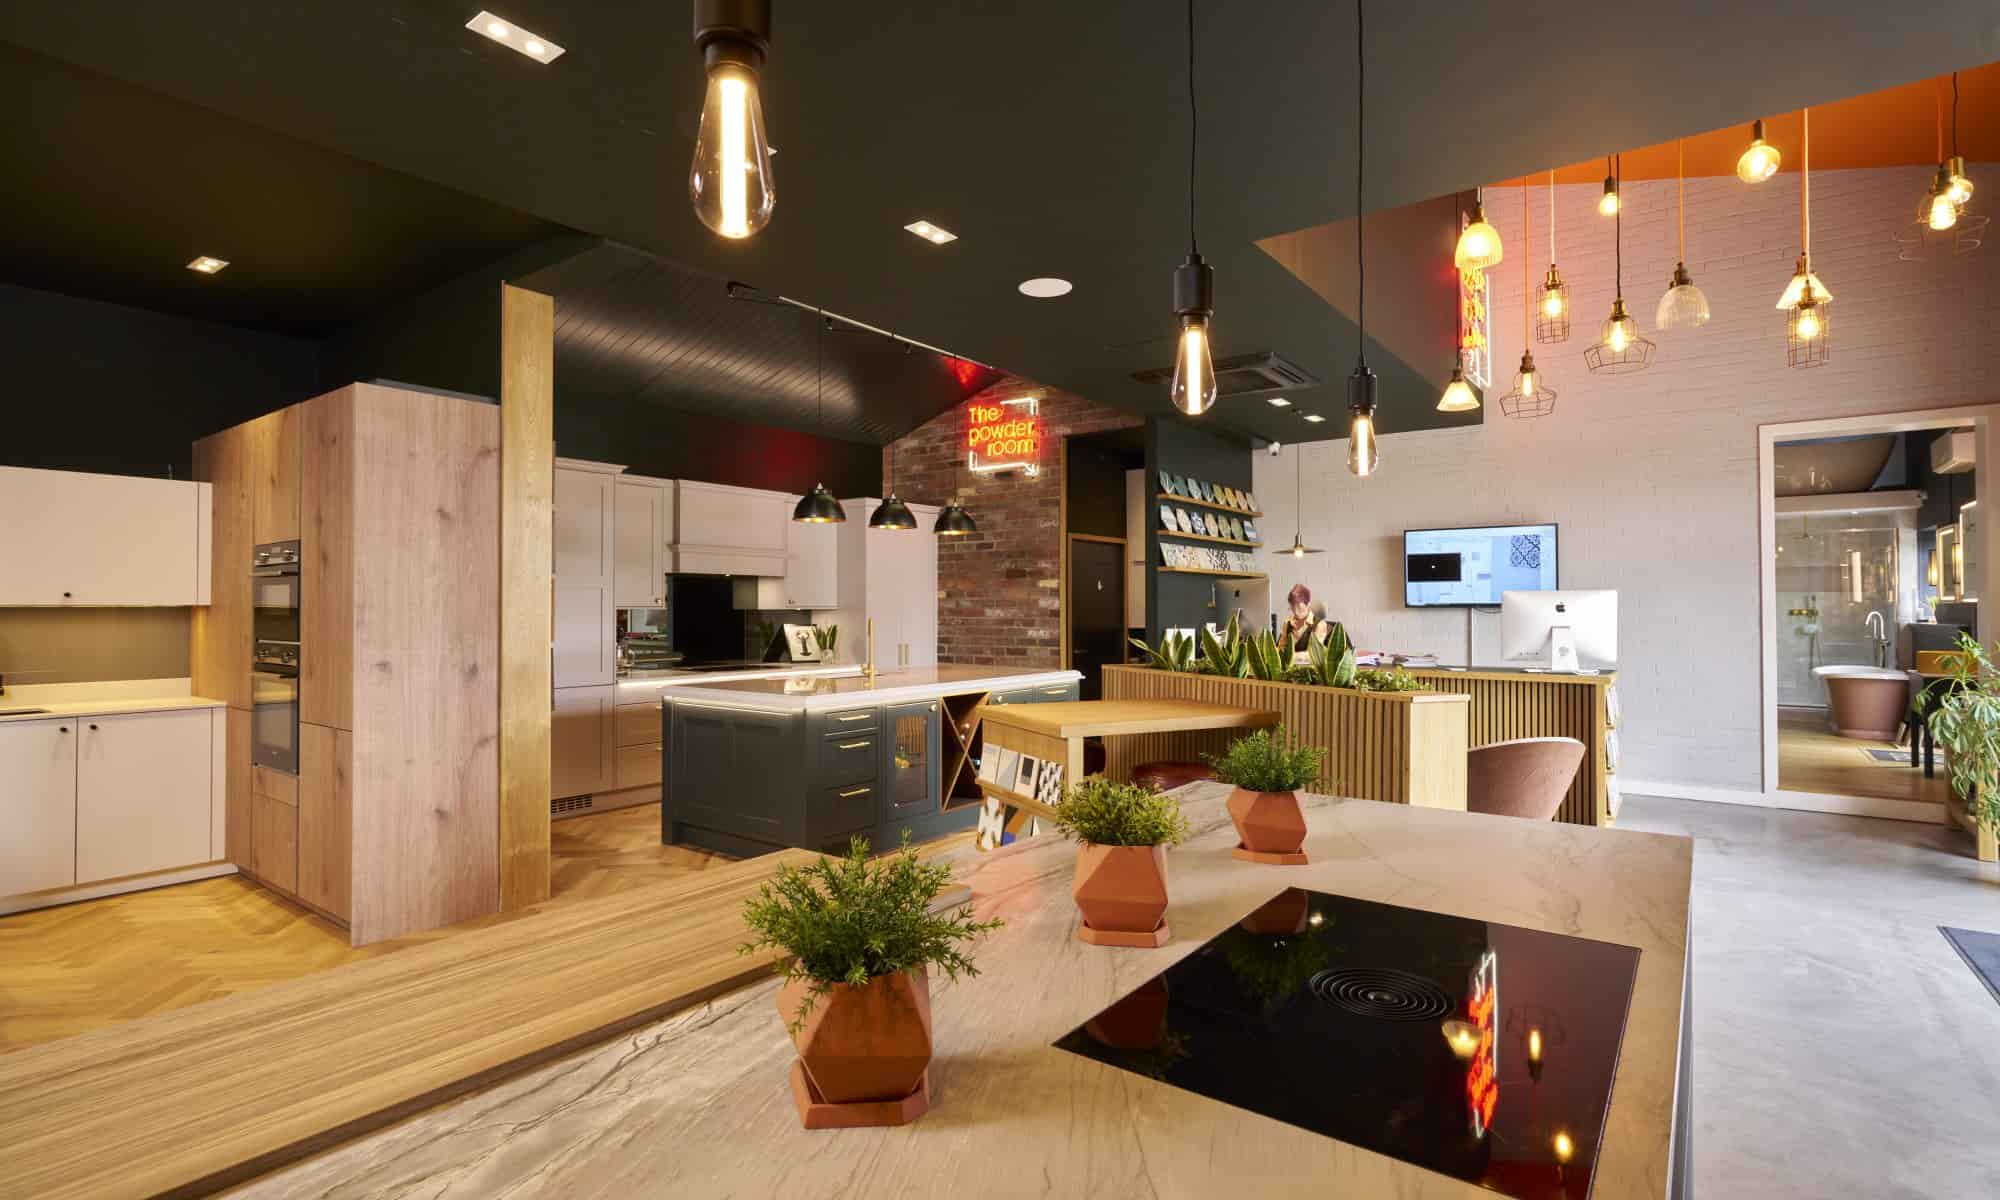 Contemporary kitchen showroom with multiple kitchen setups, featuring various cabinetry styles, a central island with plants, and modern pendant lighting.